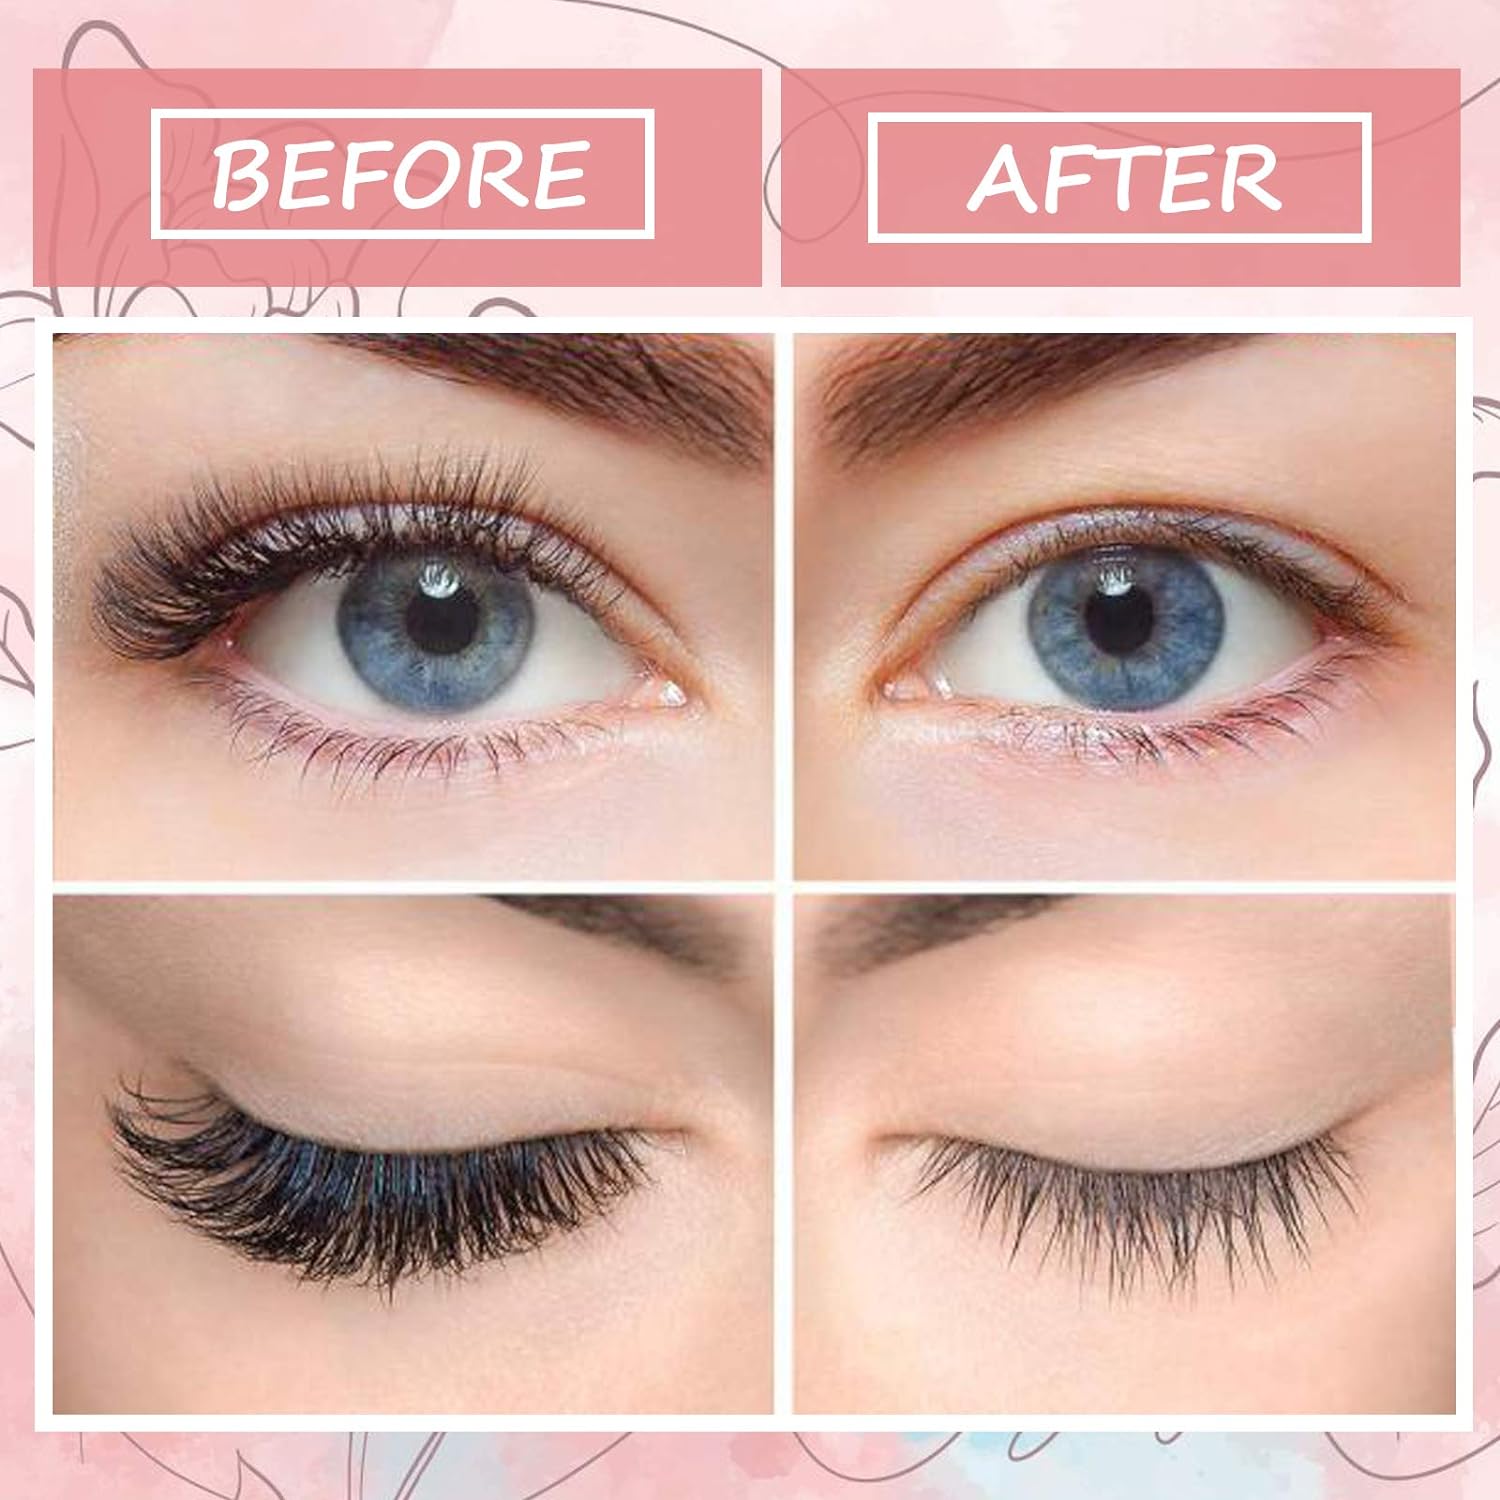  BARCHID Eyelash Extension Remover,Individual Eyelash Remover,Fast Action Dissolves Even The Strongest False Lash Adhesive in 60 Seconds,15 ml